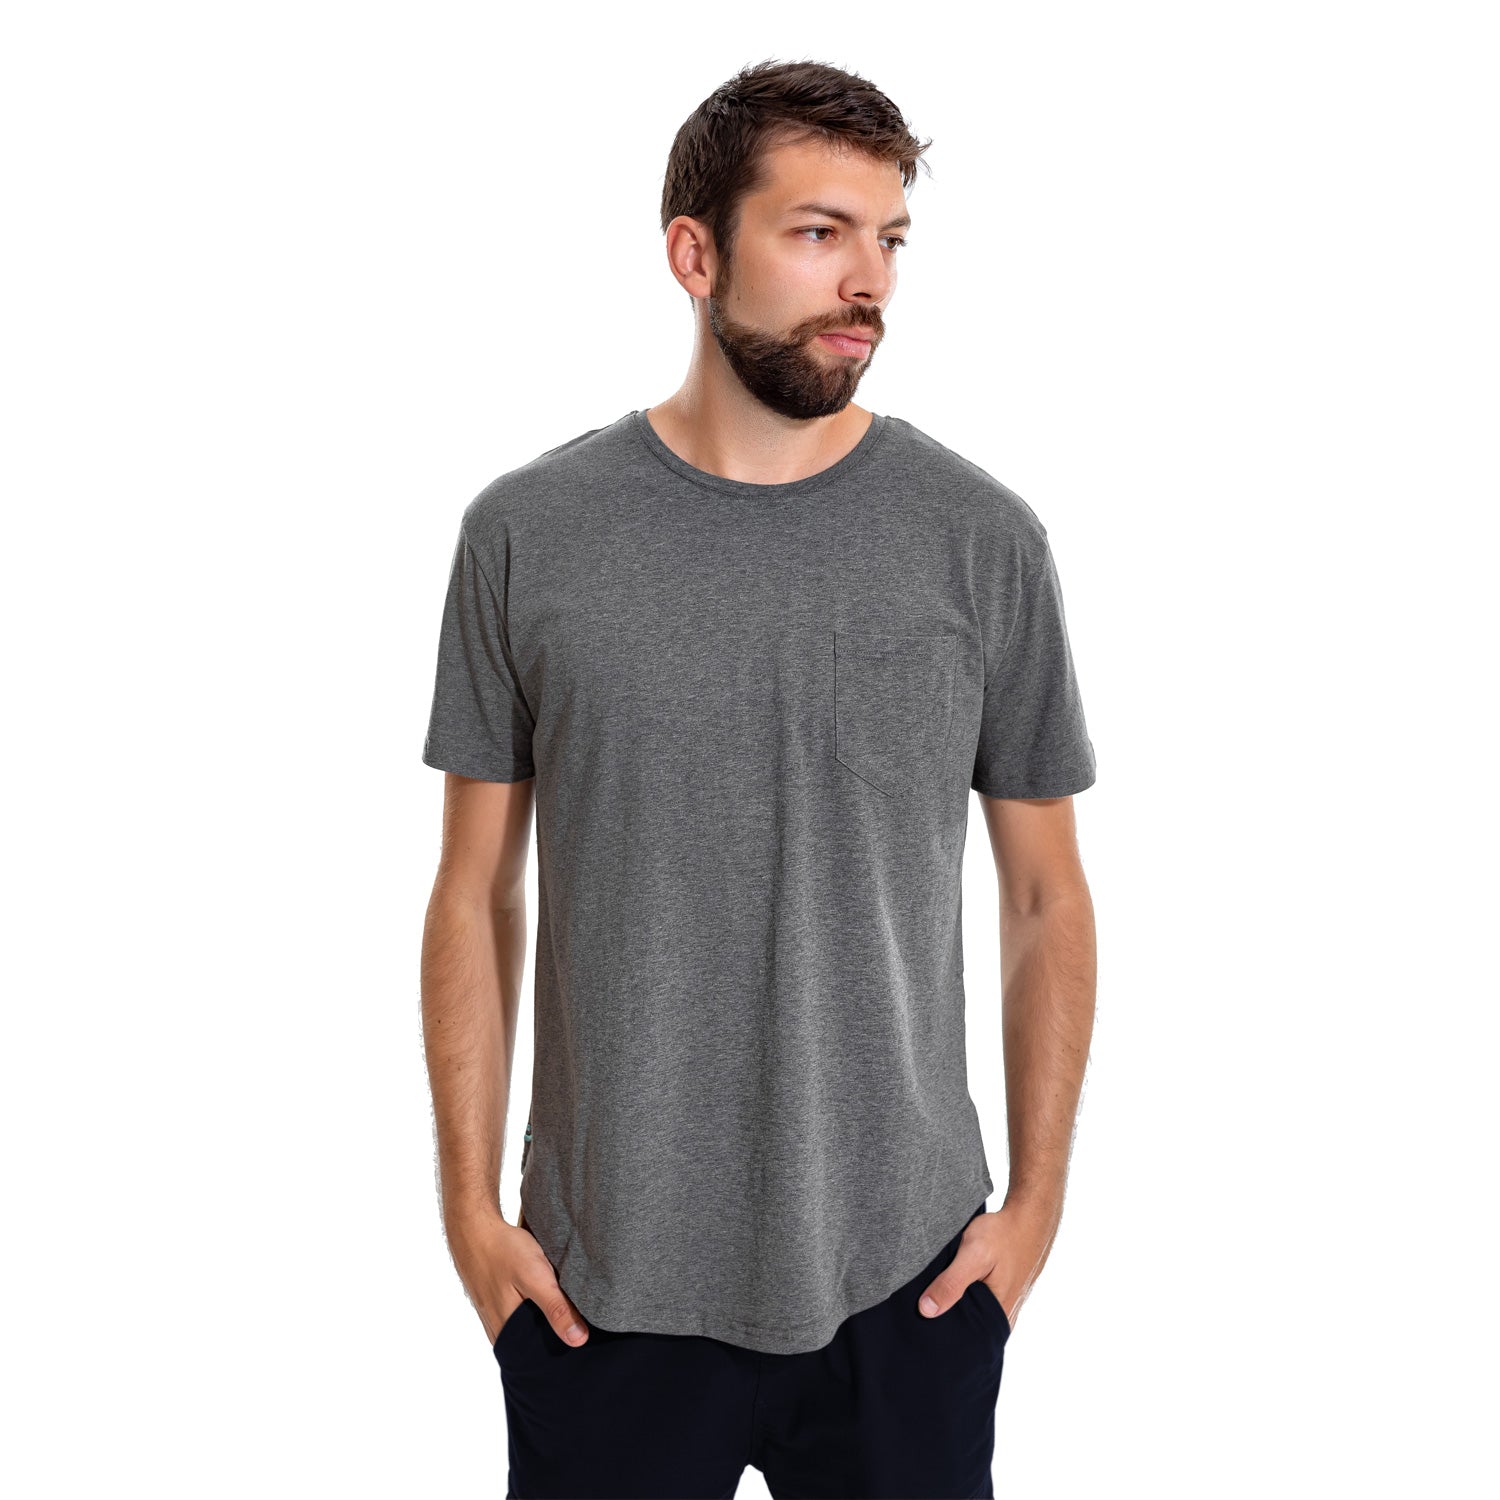 grey T-shirt, tee, front pocket, embroidery signature, iconic, front view, Model